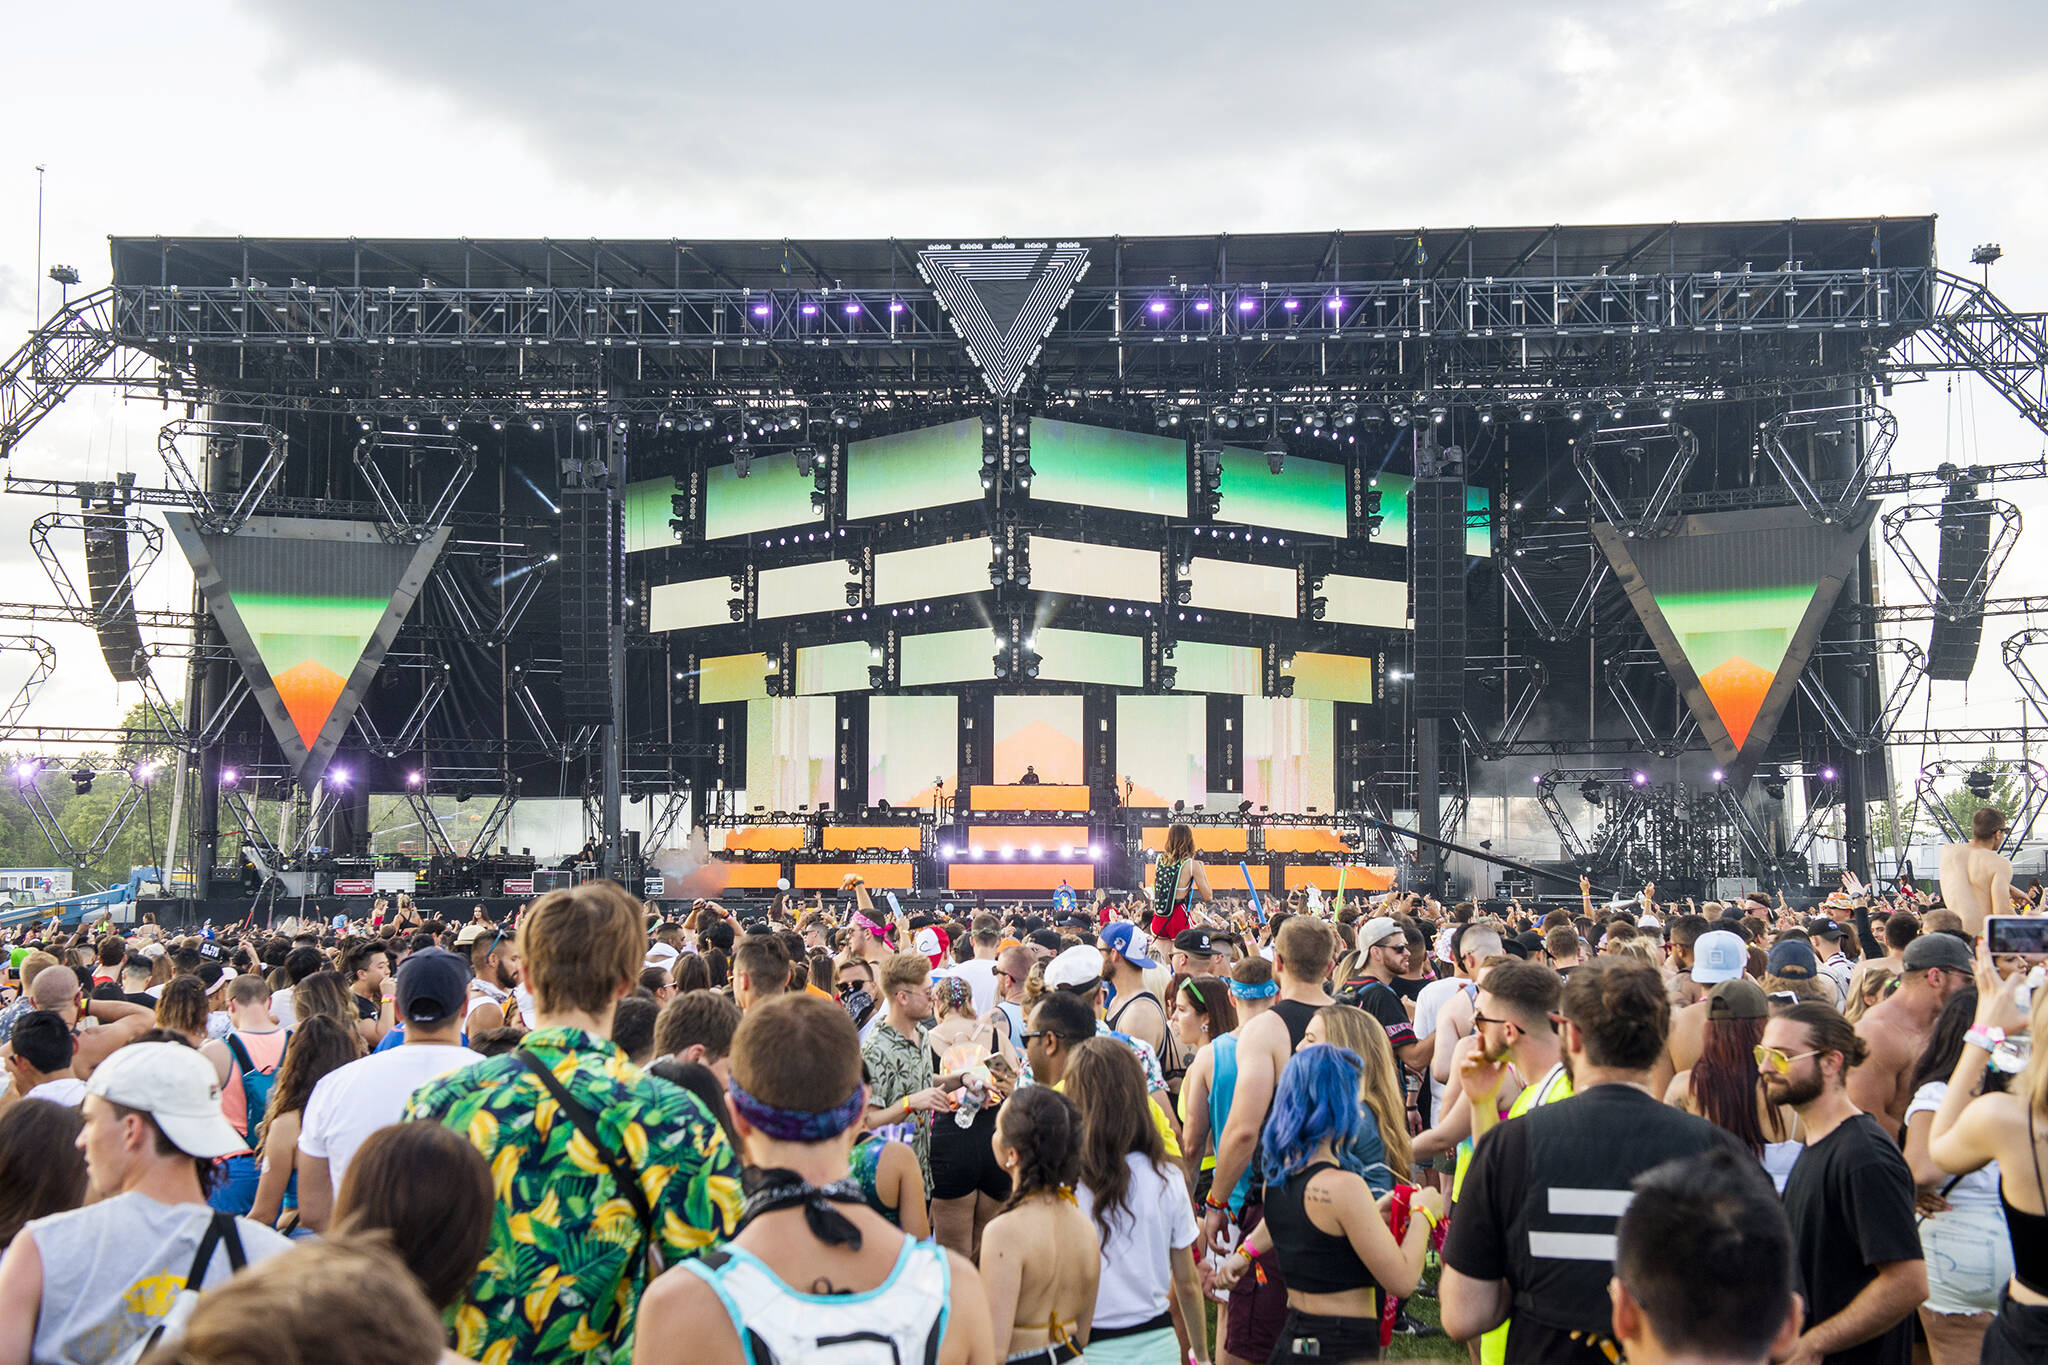 Veld releases its 2022 lineup